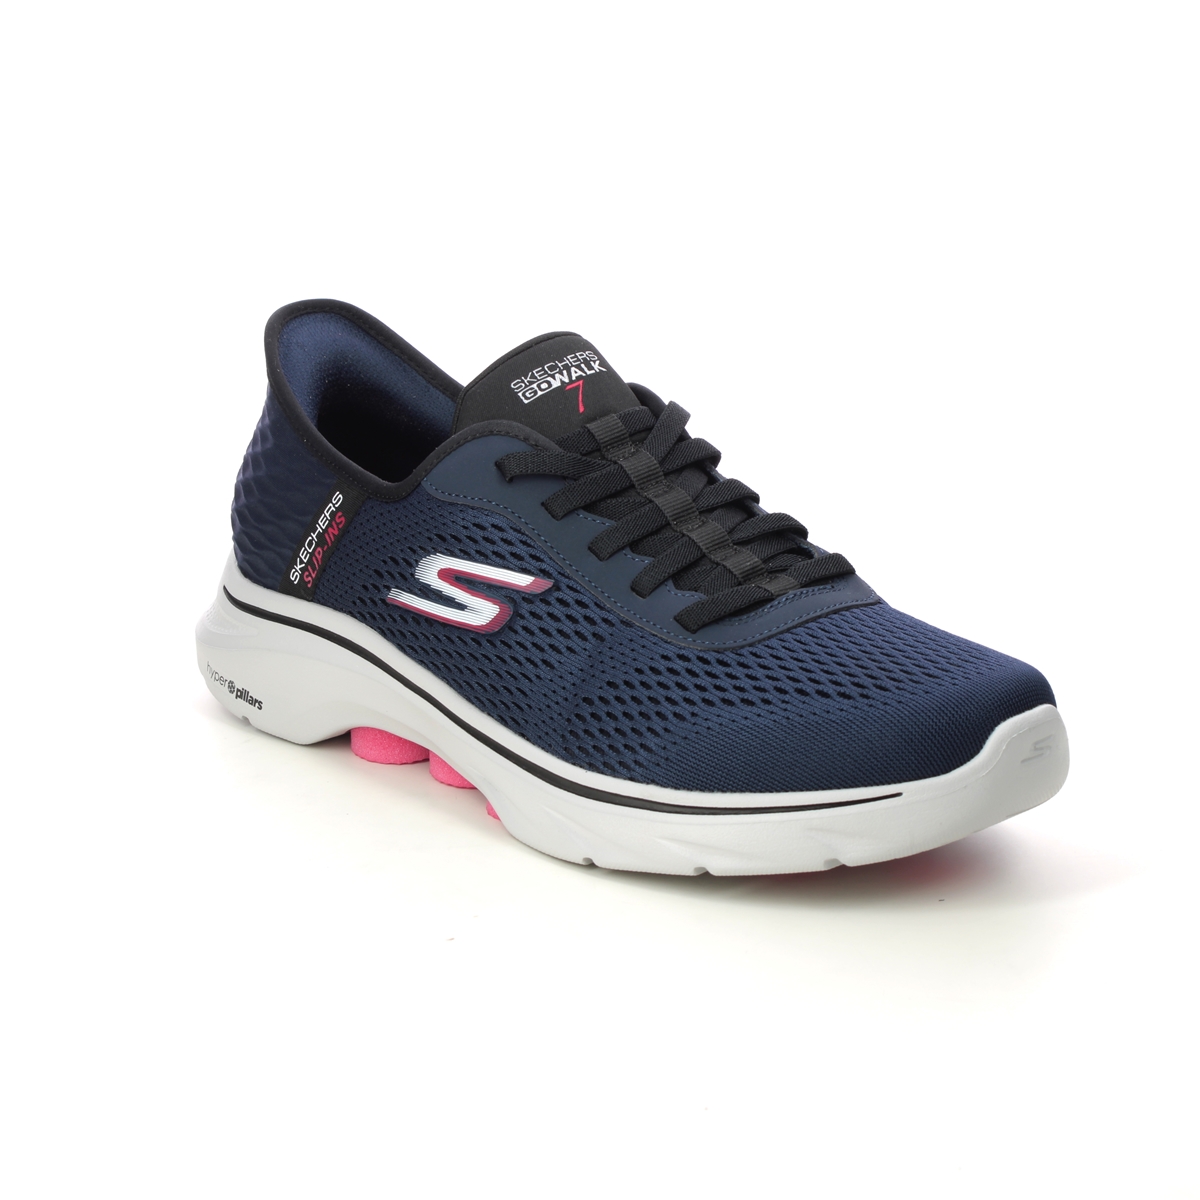 Skechers Slip Ins Go Walk 7 Bungee NVRD Navy Red Mens trainers 216648 in a Plain Textile in Size 8